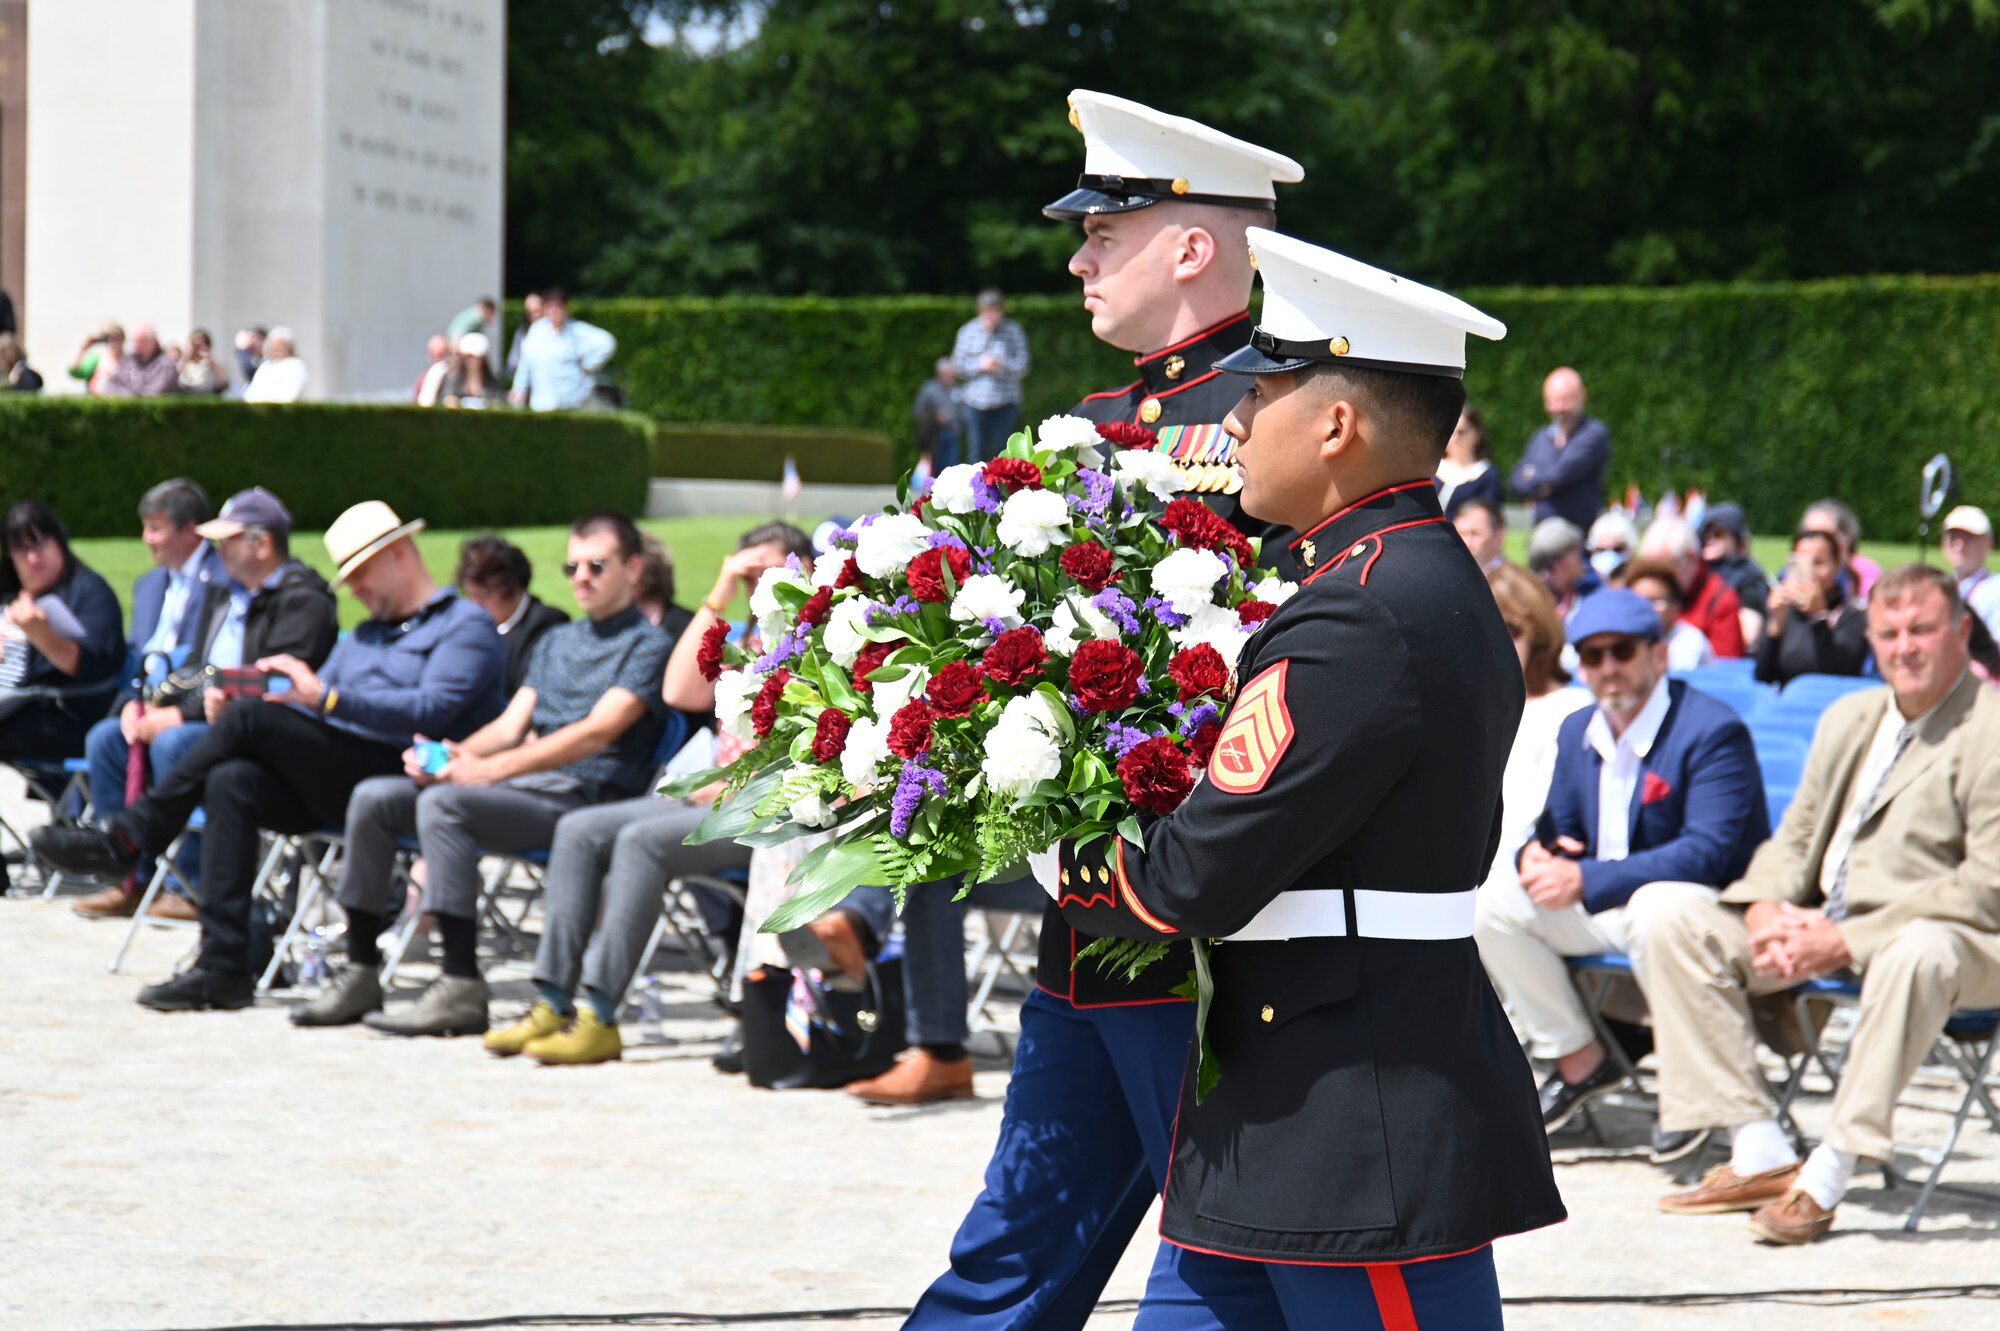 Two U.S. Marines, with the U.S. Luxembourg Embassy, present a wreath during a Memorial Day event at the Luxembourg American Military Cemetery in Luxembourg, May 28, 2022. The ceremony brought together military representatives and hundreds of supporters to recognize the sacrifices made by American service members in support of freedom abroad. (U.S. Air Force photo by Airman 1st Class Jessica Sanchez-Chen)